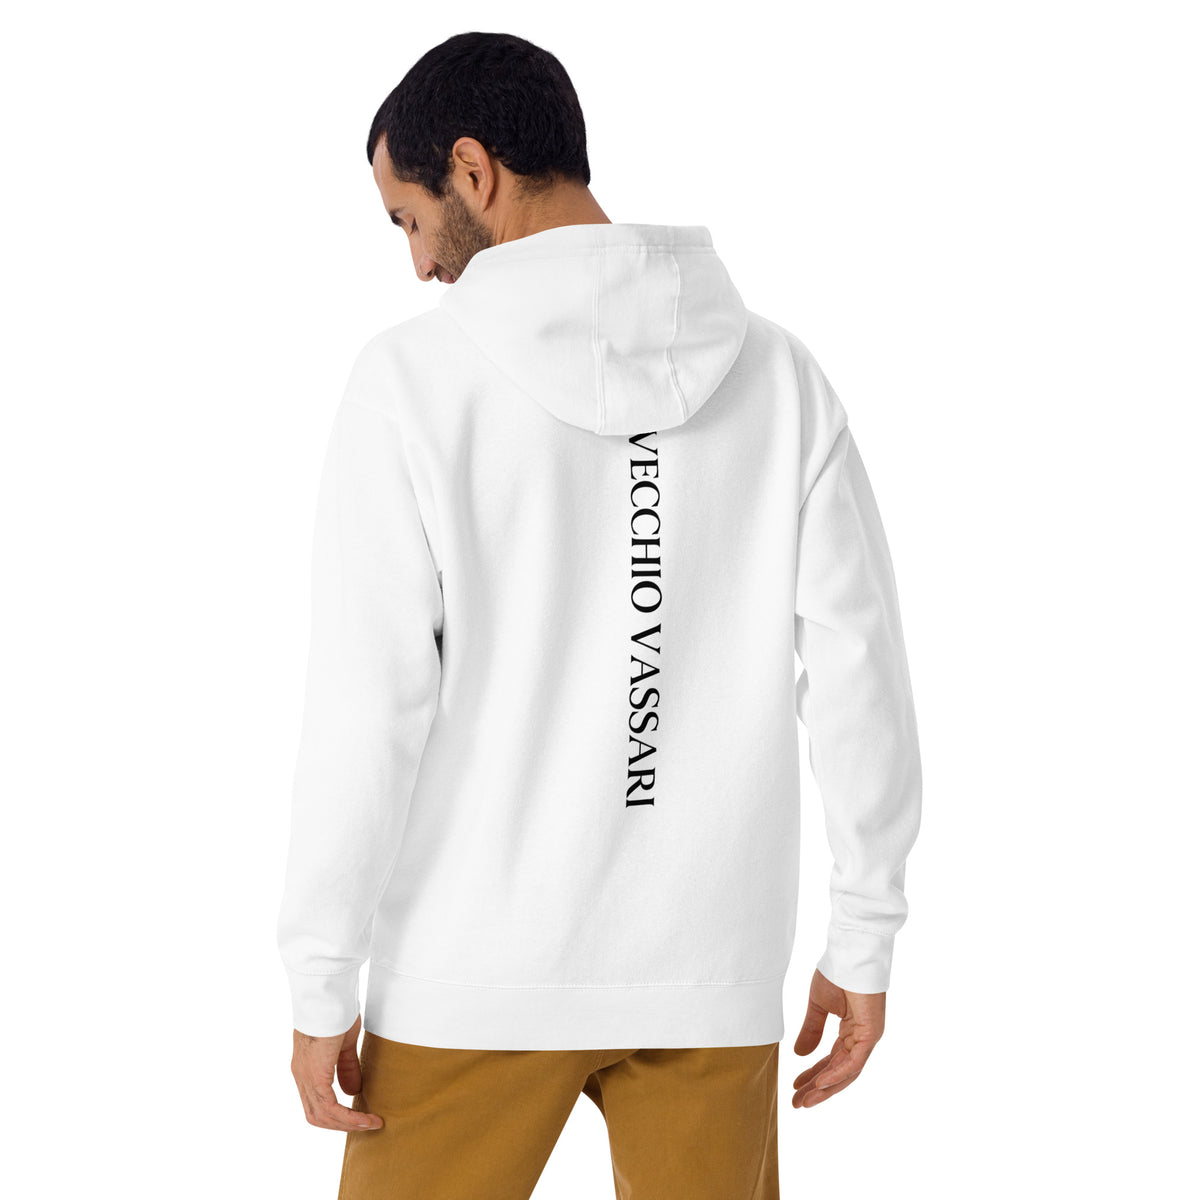 &quot;Make Up Your Own Mind&quot; Hoodie (White/Black)